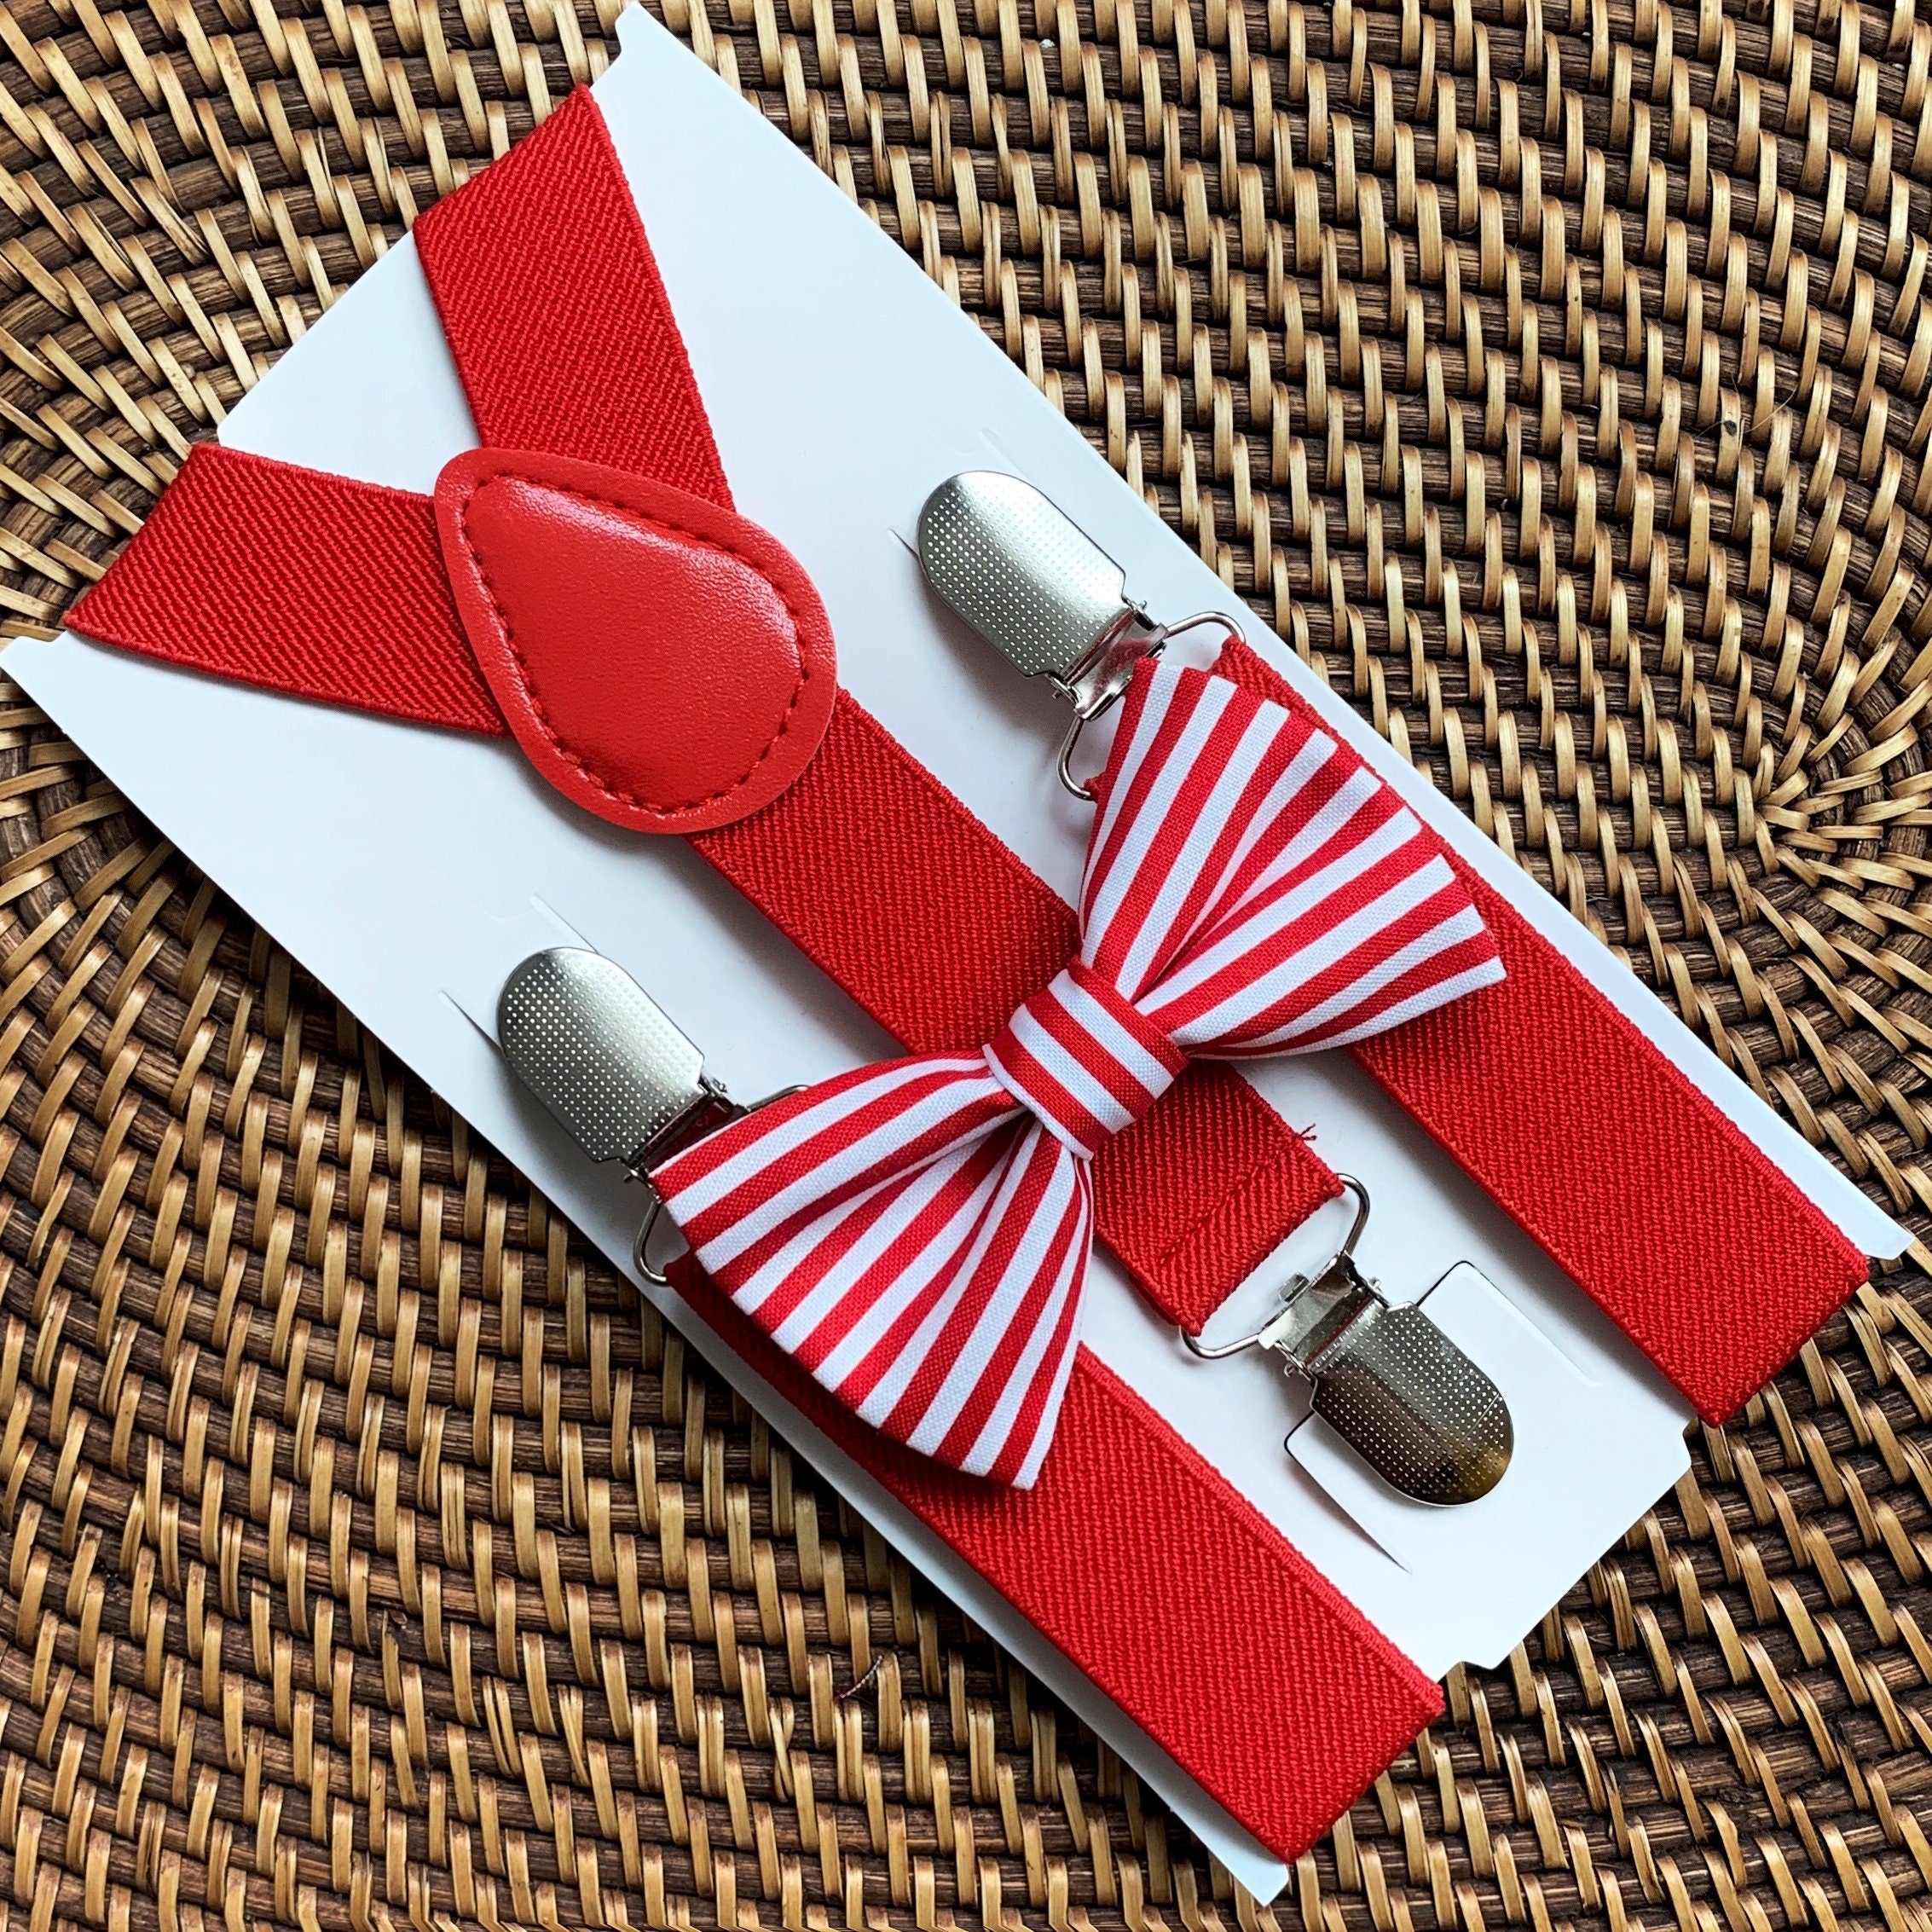 Red & White Striped Bow Tie & Red Suspenders Set